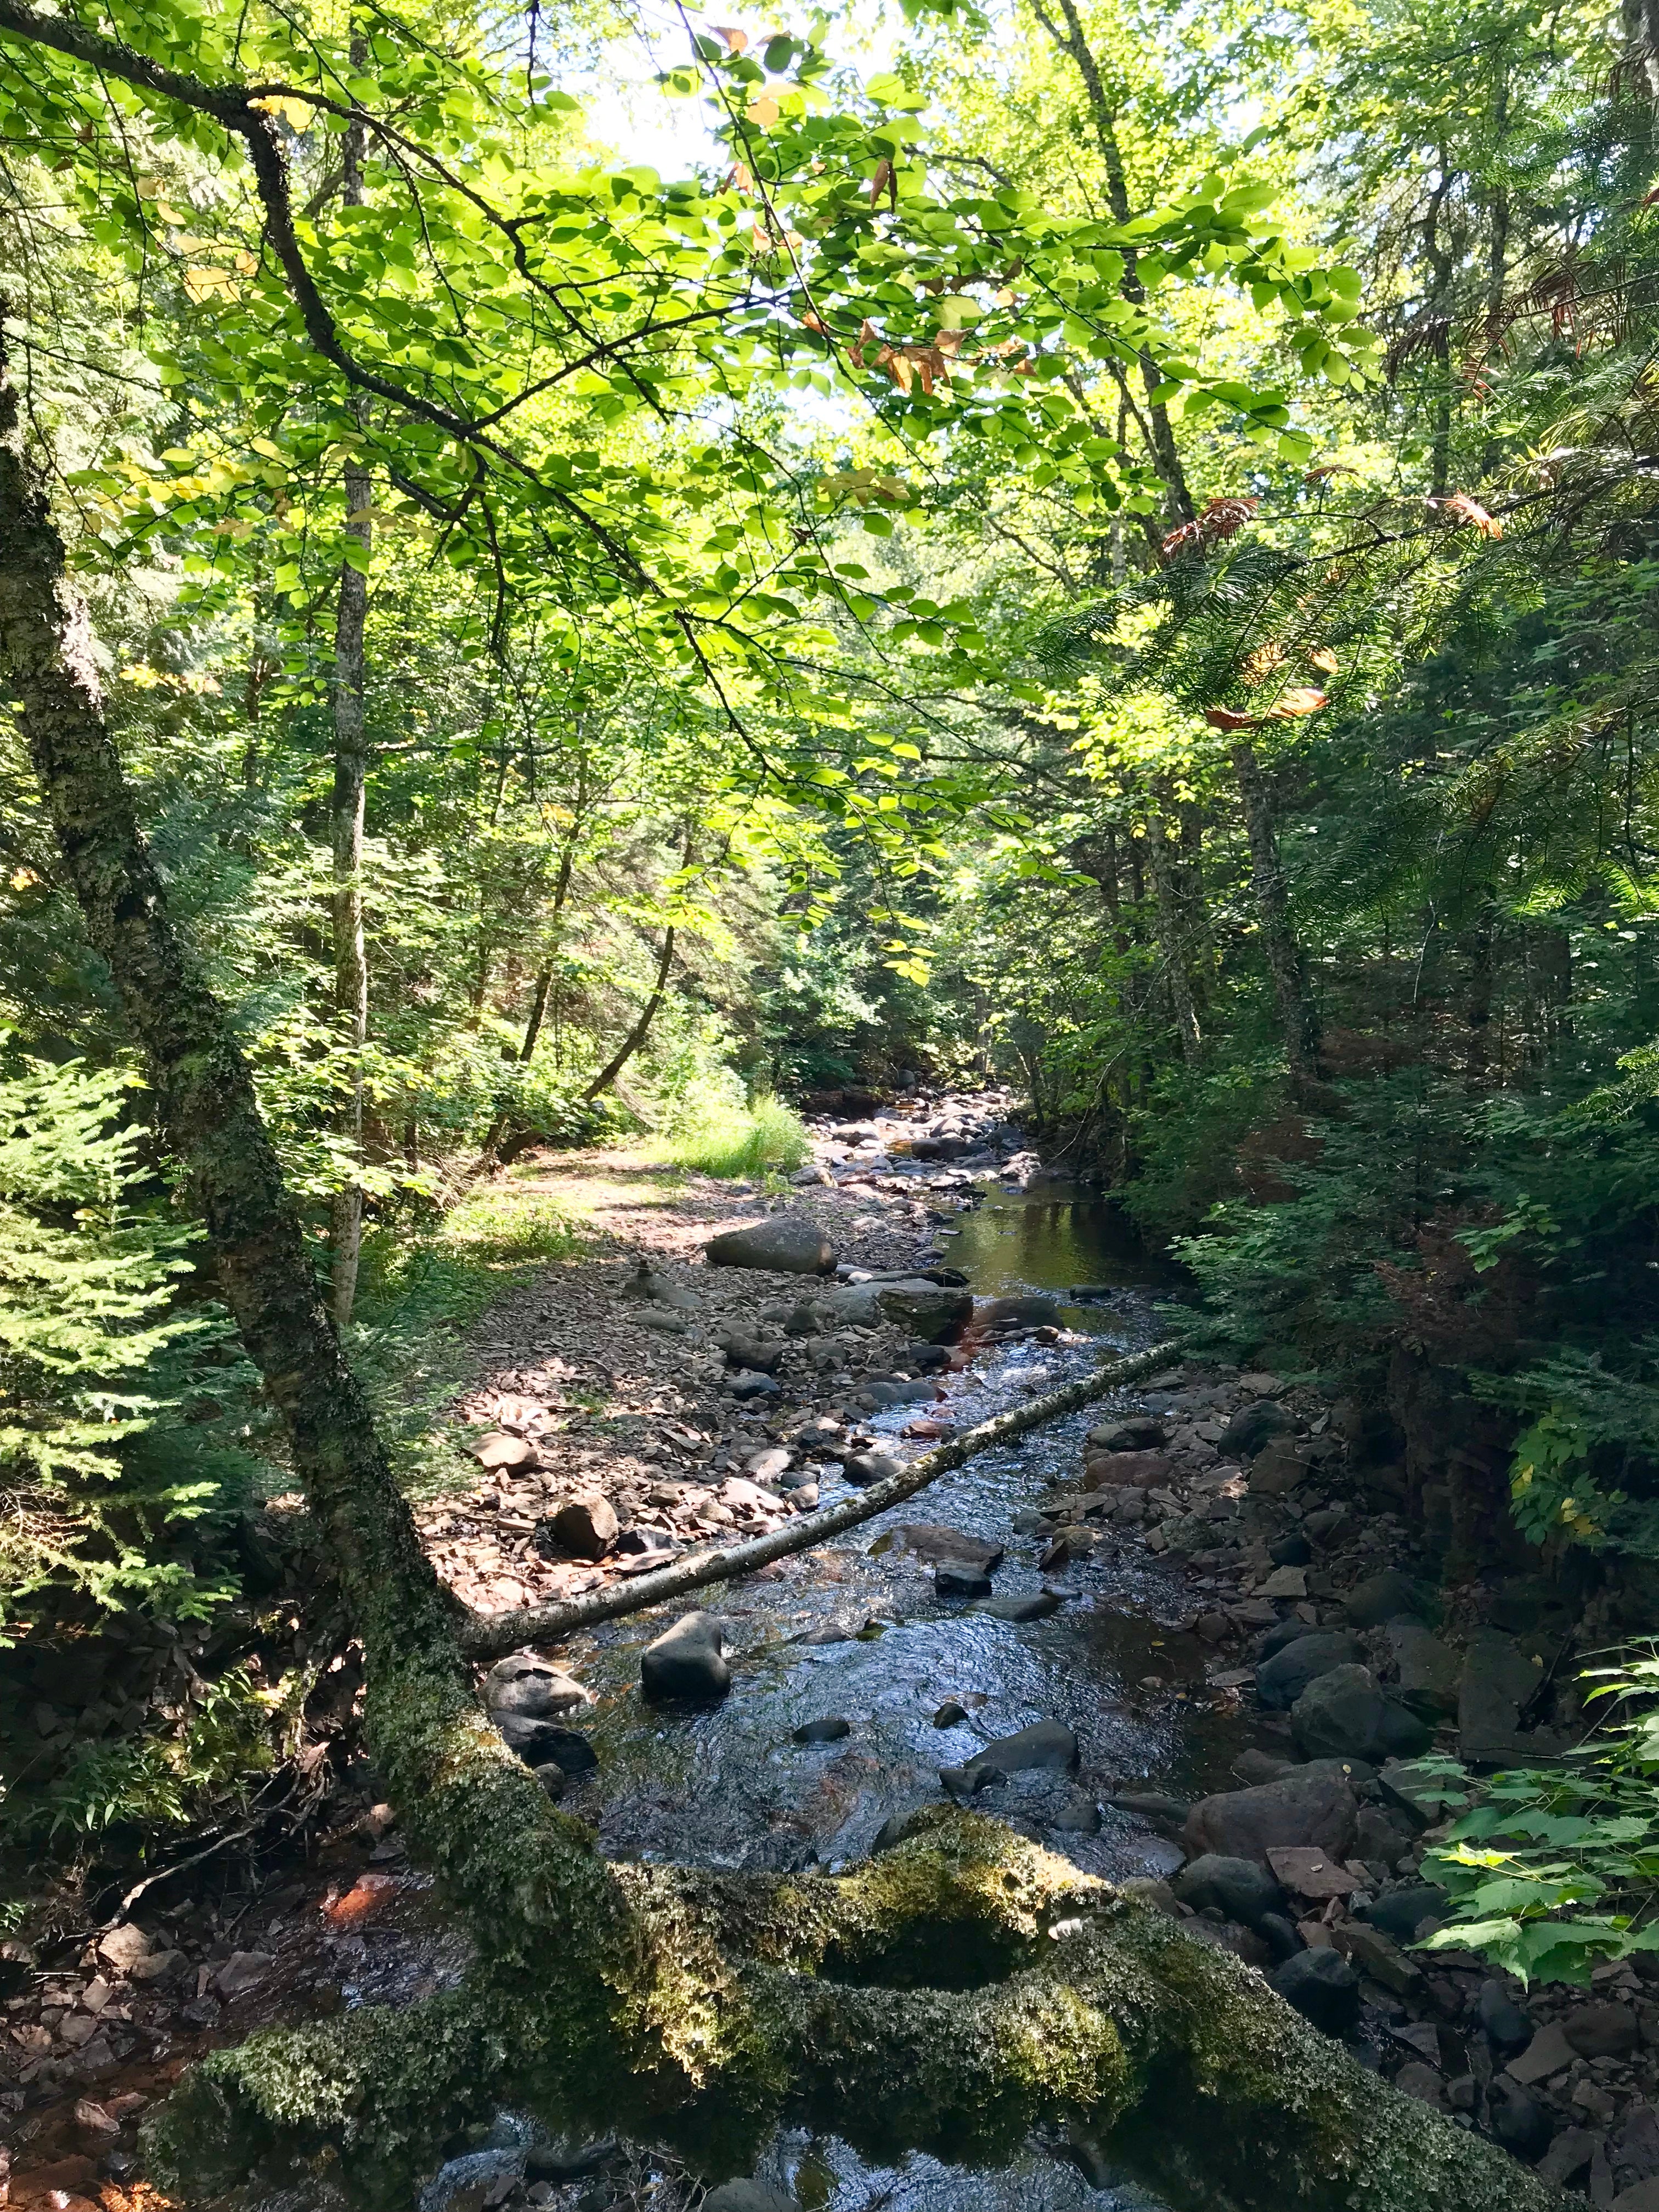 Camper submitted image from Kimball Creek, Superior Hiking Trail - 3